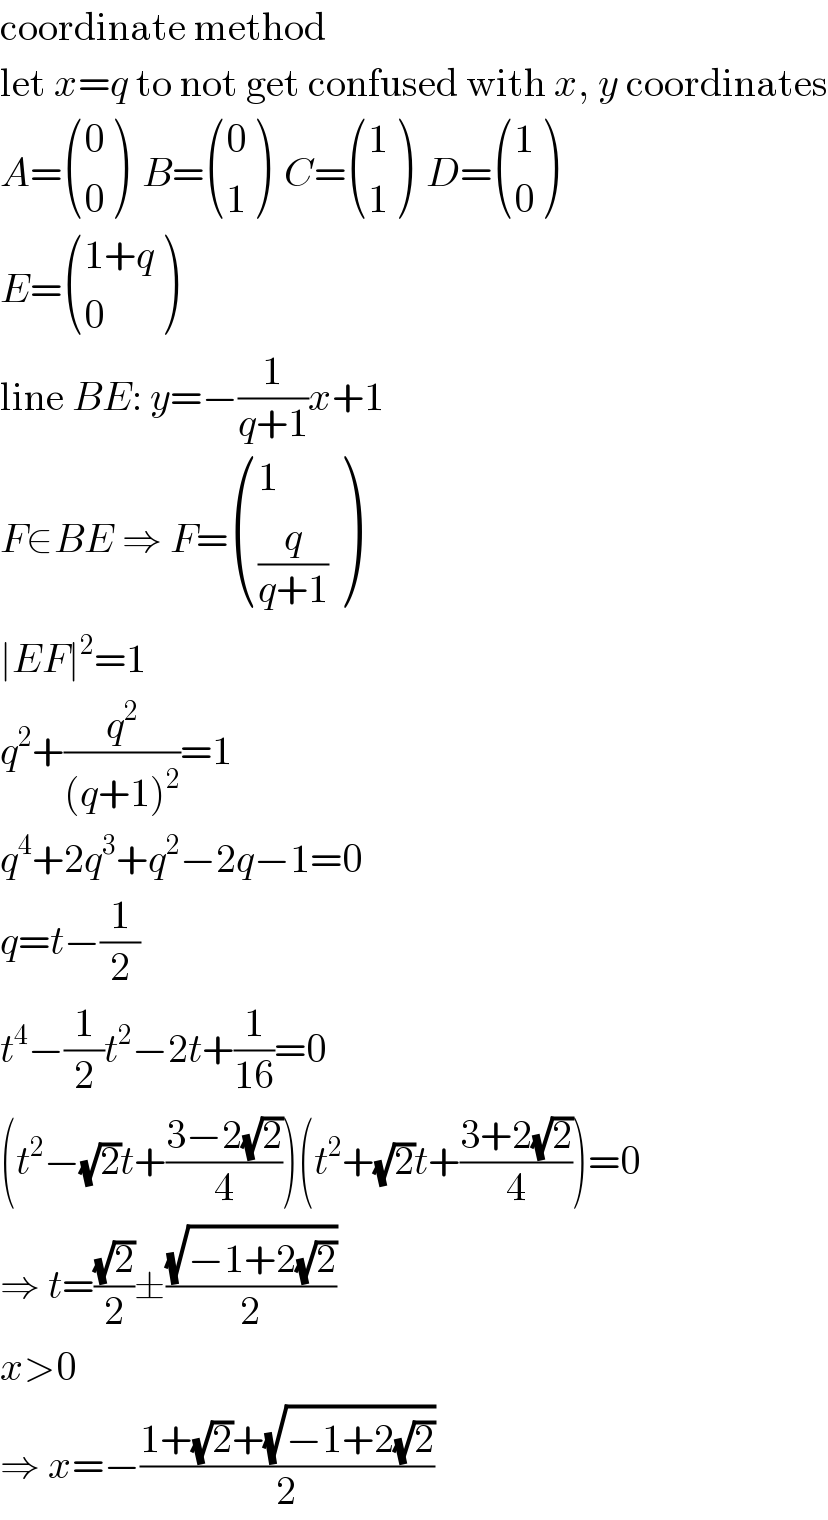 coordinate method  let x=q to not get confused with x, y coordinates  A= ((0),(0) )  B= ((0),(1) )  C= ((1),(1) )  D= ((1),(0) )  E= (((1+q)),(0) )  line BE: y=−(1/(q+1))x+1  F∈BE ⇒ F= ((1),((q/(q+1))) )  ∣EF∣^2 =1  q^2 +(q^2 /((q+1)^2 ))=1  q^4 +2q^3 +q^2 −2q−1=0  q=t−(1/2)  t^4 −(1/2)t^2 −2t+(1/(16))=0  (t^2 −(√2)t+((3−2(√2))/4))(t^2 +(√2)t+((3+2(√2))/4))=0  ⇒ t=((√2)/2)±((√(−1+2(√2)))/2)  x>0  ⇒ x=−((1+(√2)+(√(−1+2(√2))))/2)  